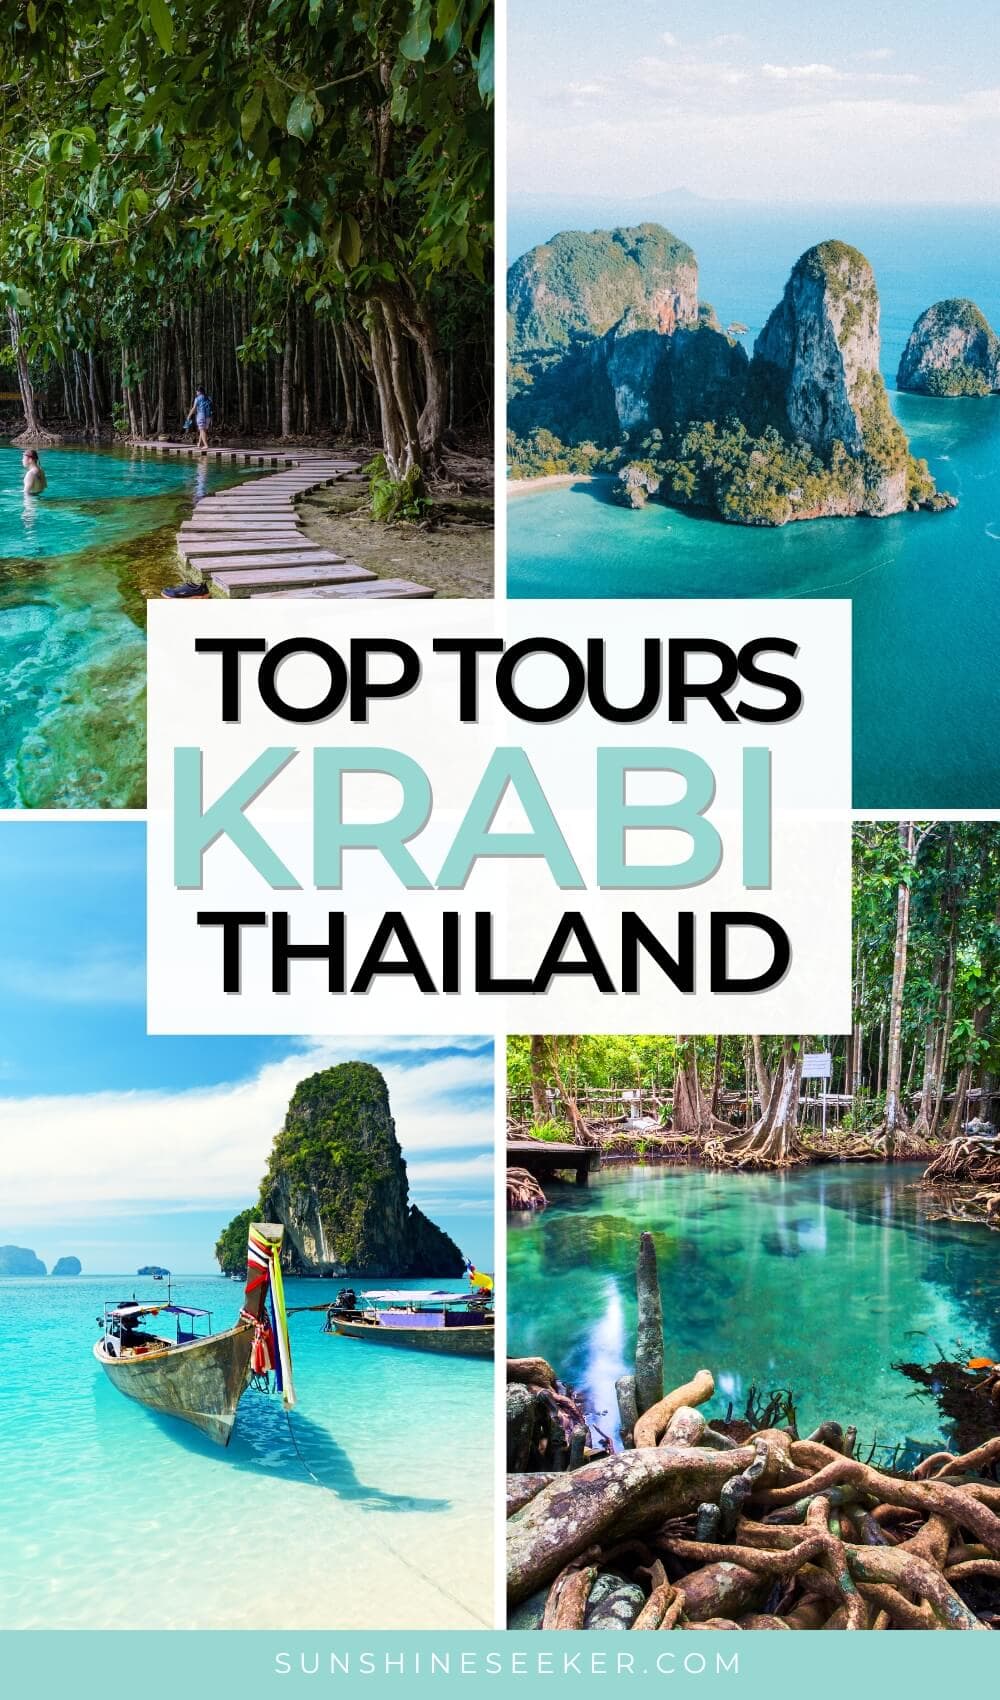 Explore the hidden gems and highlights of Krabi Thailand on these affordable guided tours. Relax in a hot spring, explore the famous Maya Bay, swim in Emerald Pool and snorkel in the clearest water you'll ever see. The landscape in Krabi is just insane, don't miss out!